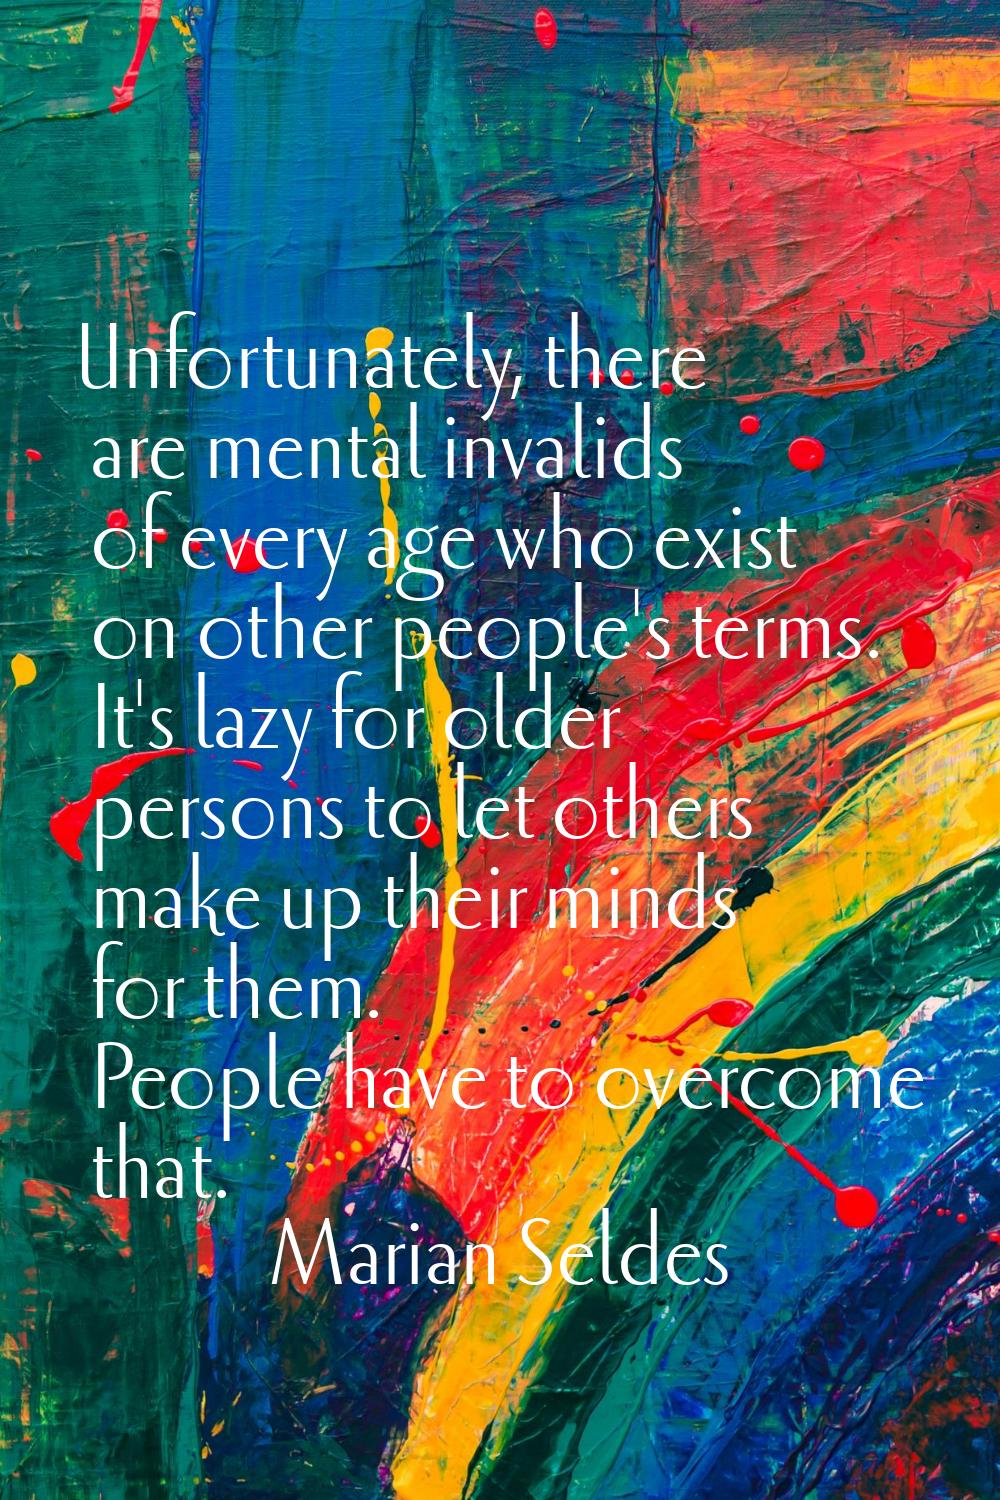 Unfortunately, there are mental invalids of every age who exist on other people's terms. It's lazy 